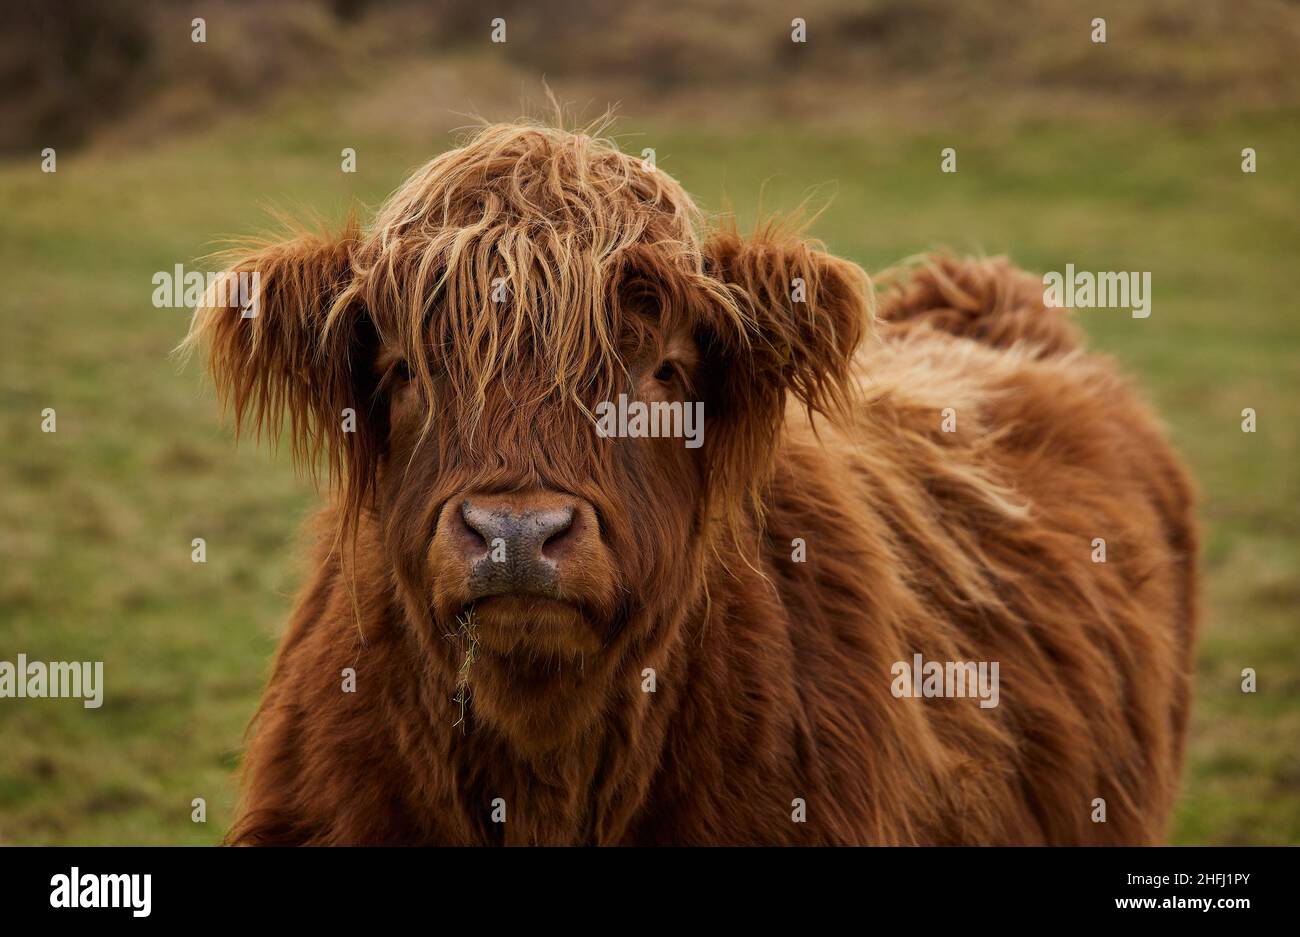 Scottish alpine cow portrait closed with blur background. Ireland, Co. Donegal Stock Photo